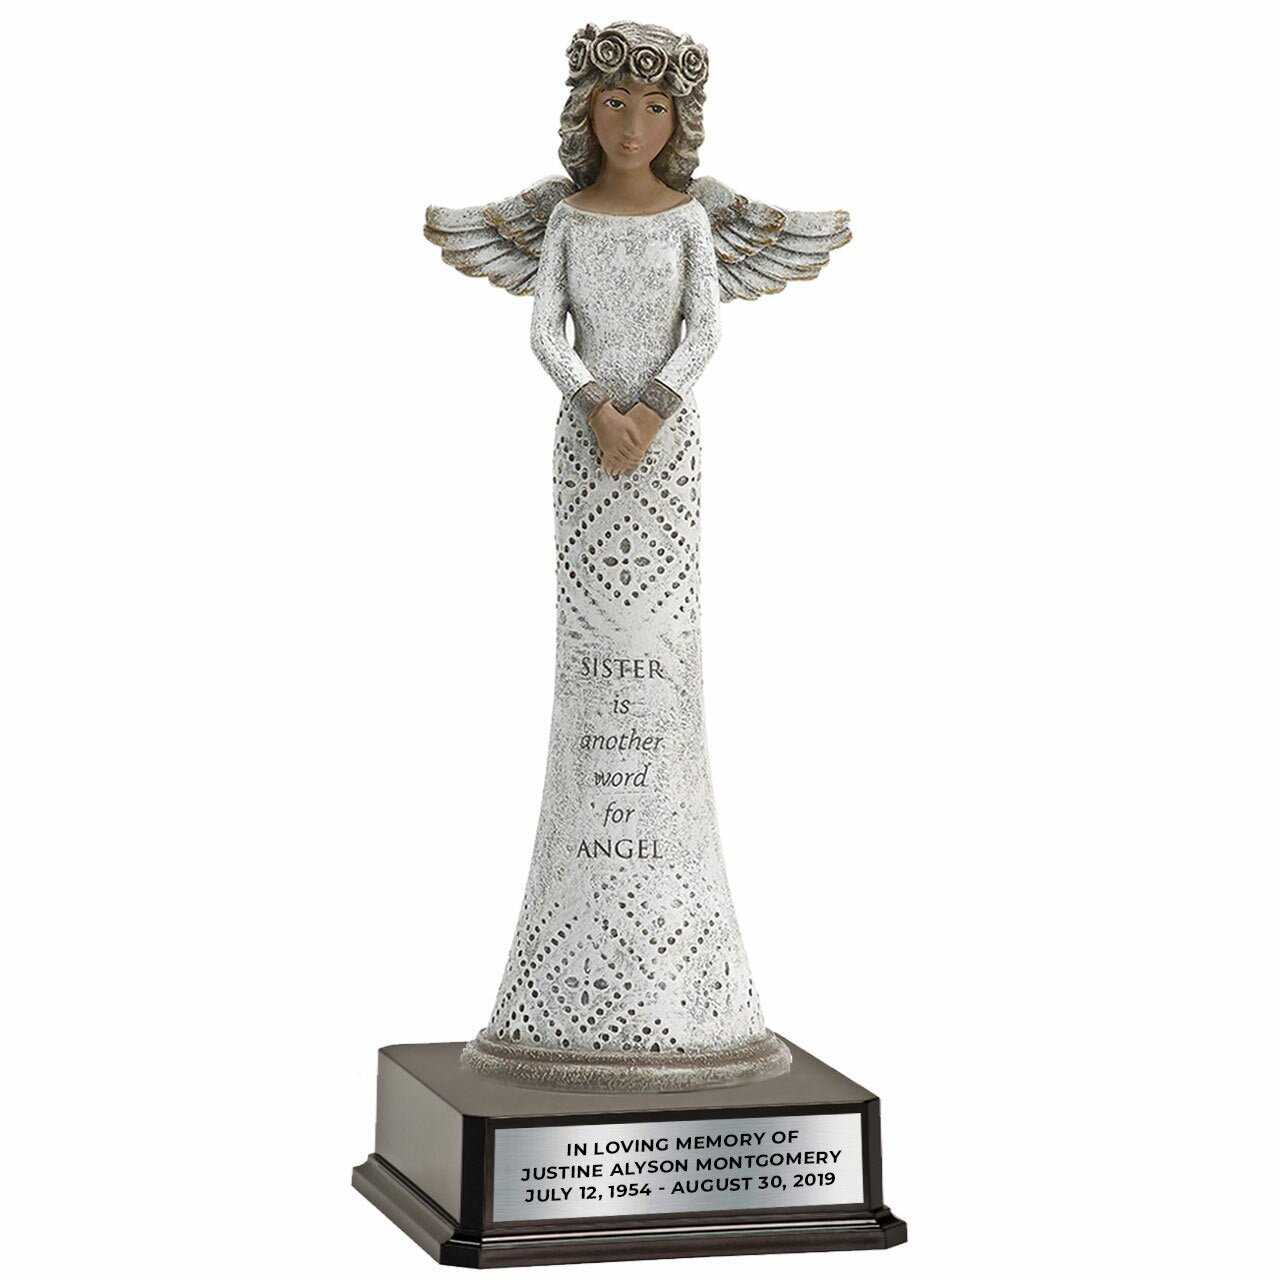 Dark Skin Sister In Loving Memory Angel Figurine With Personalized Stand 